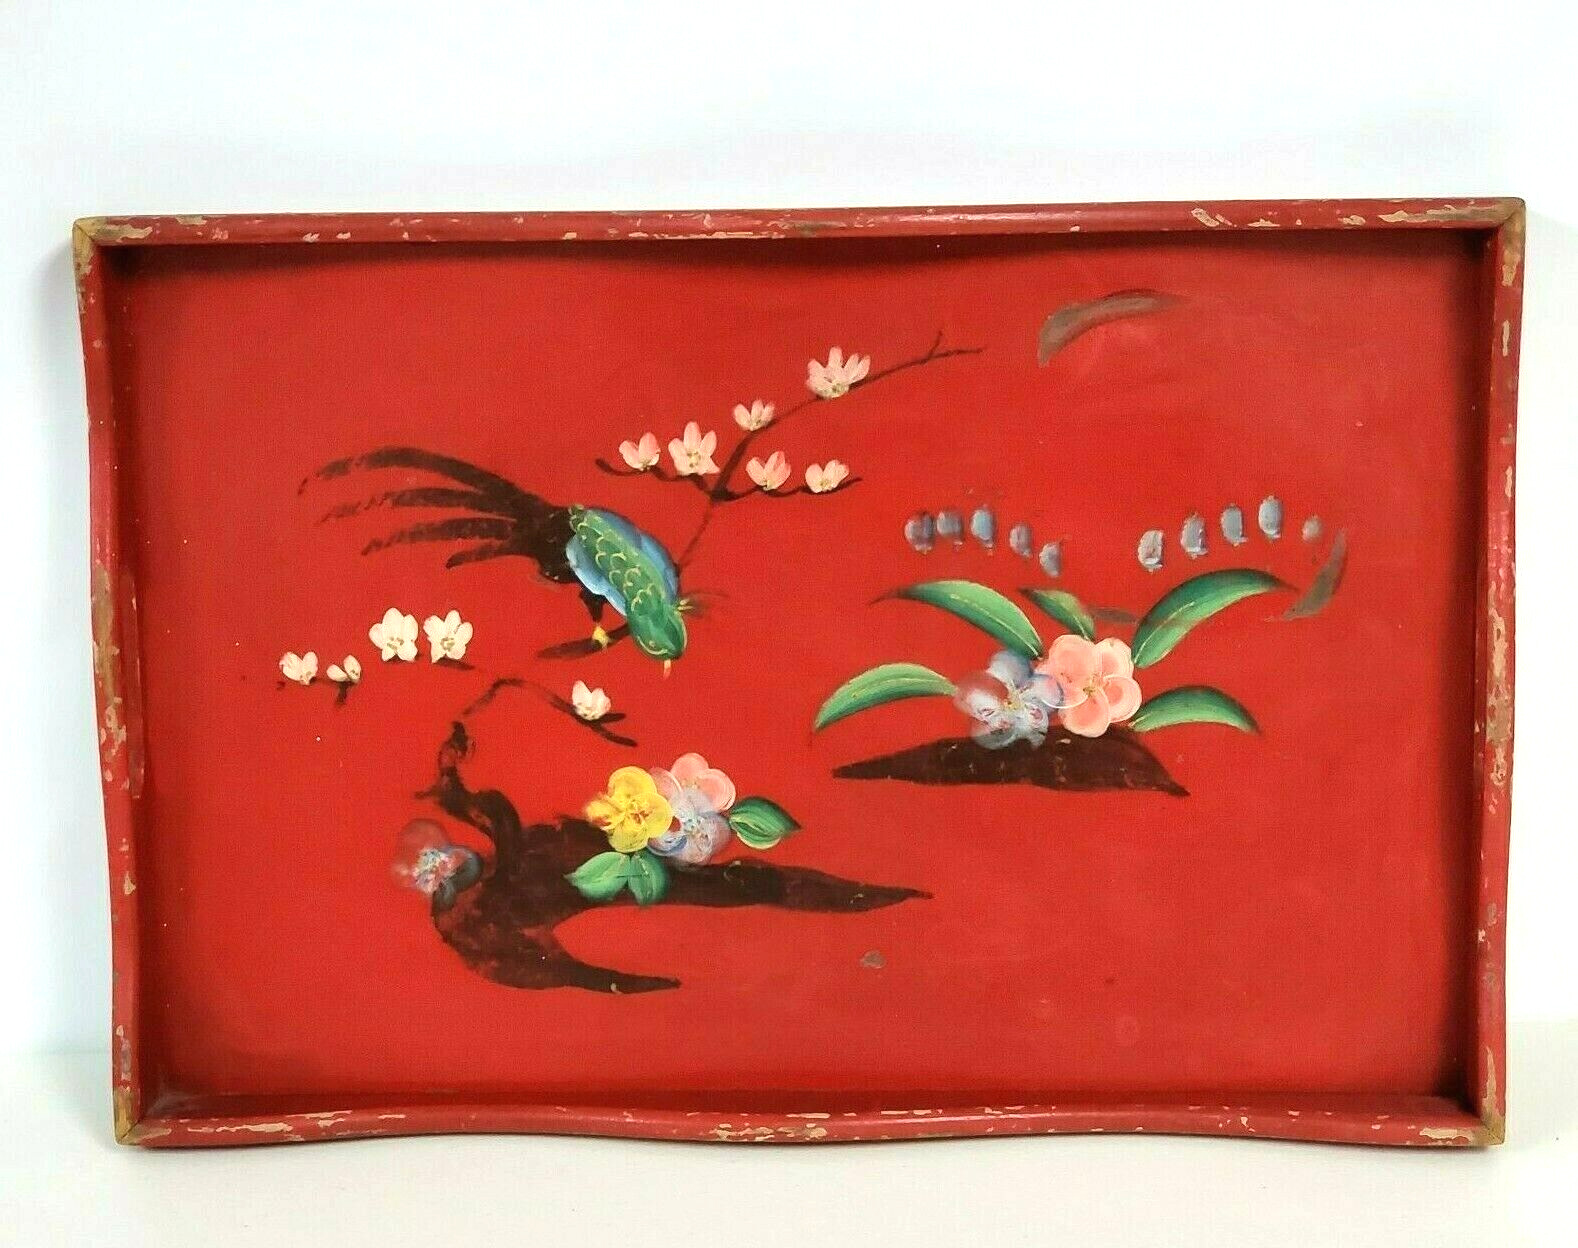 Wood Painted Serving Tray with Birds & Flower Decorations Red Shabby Vintage